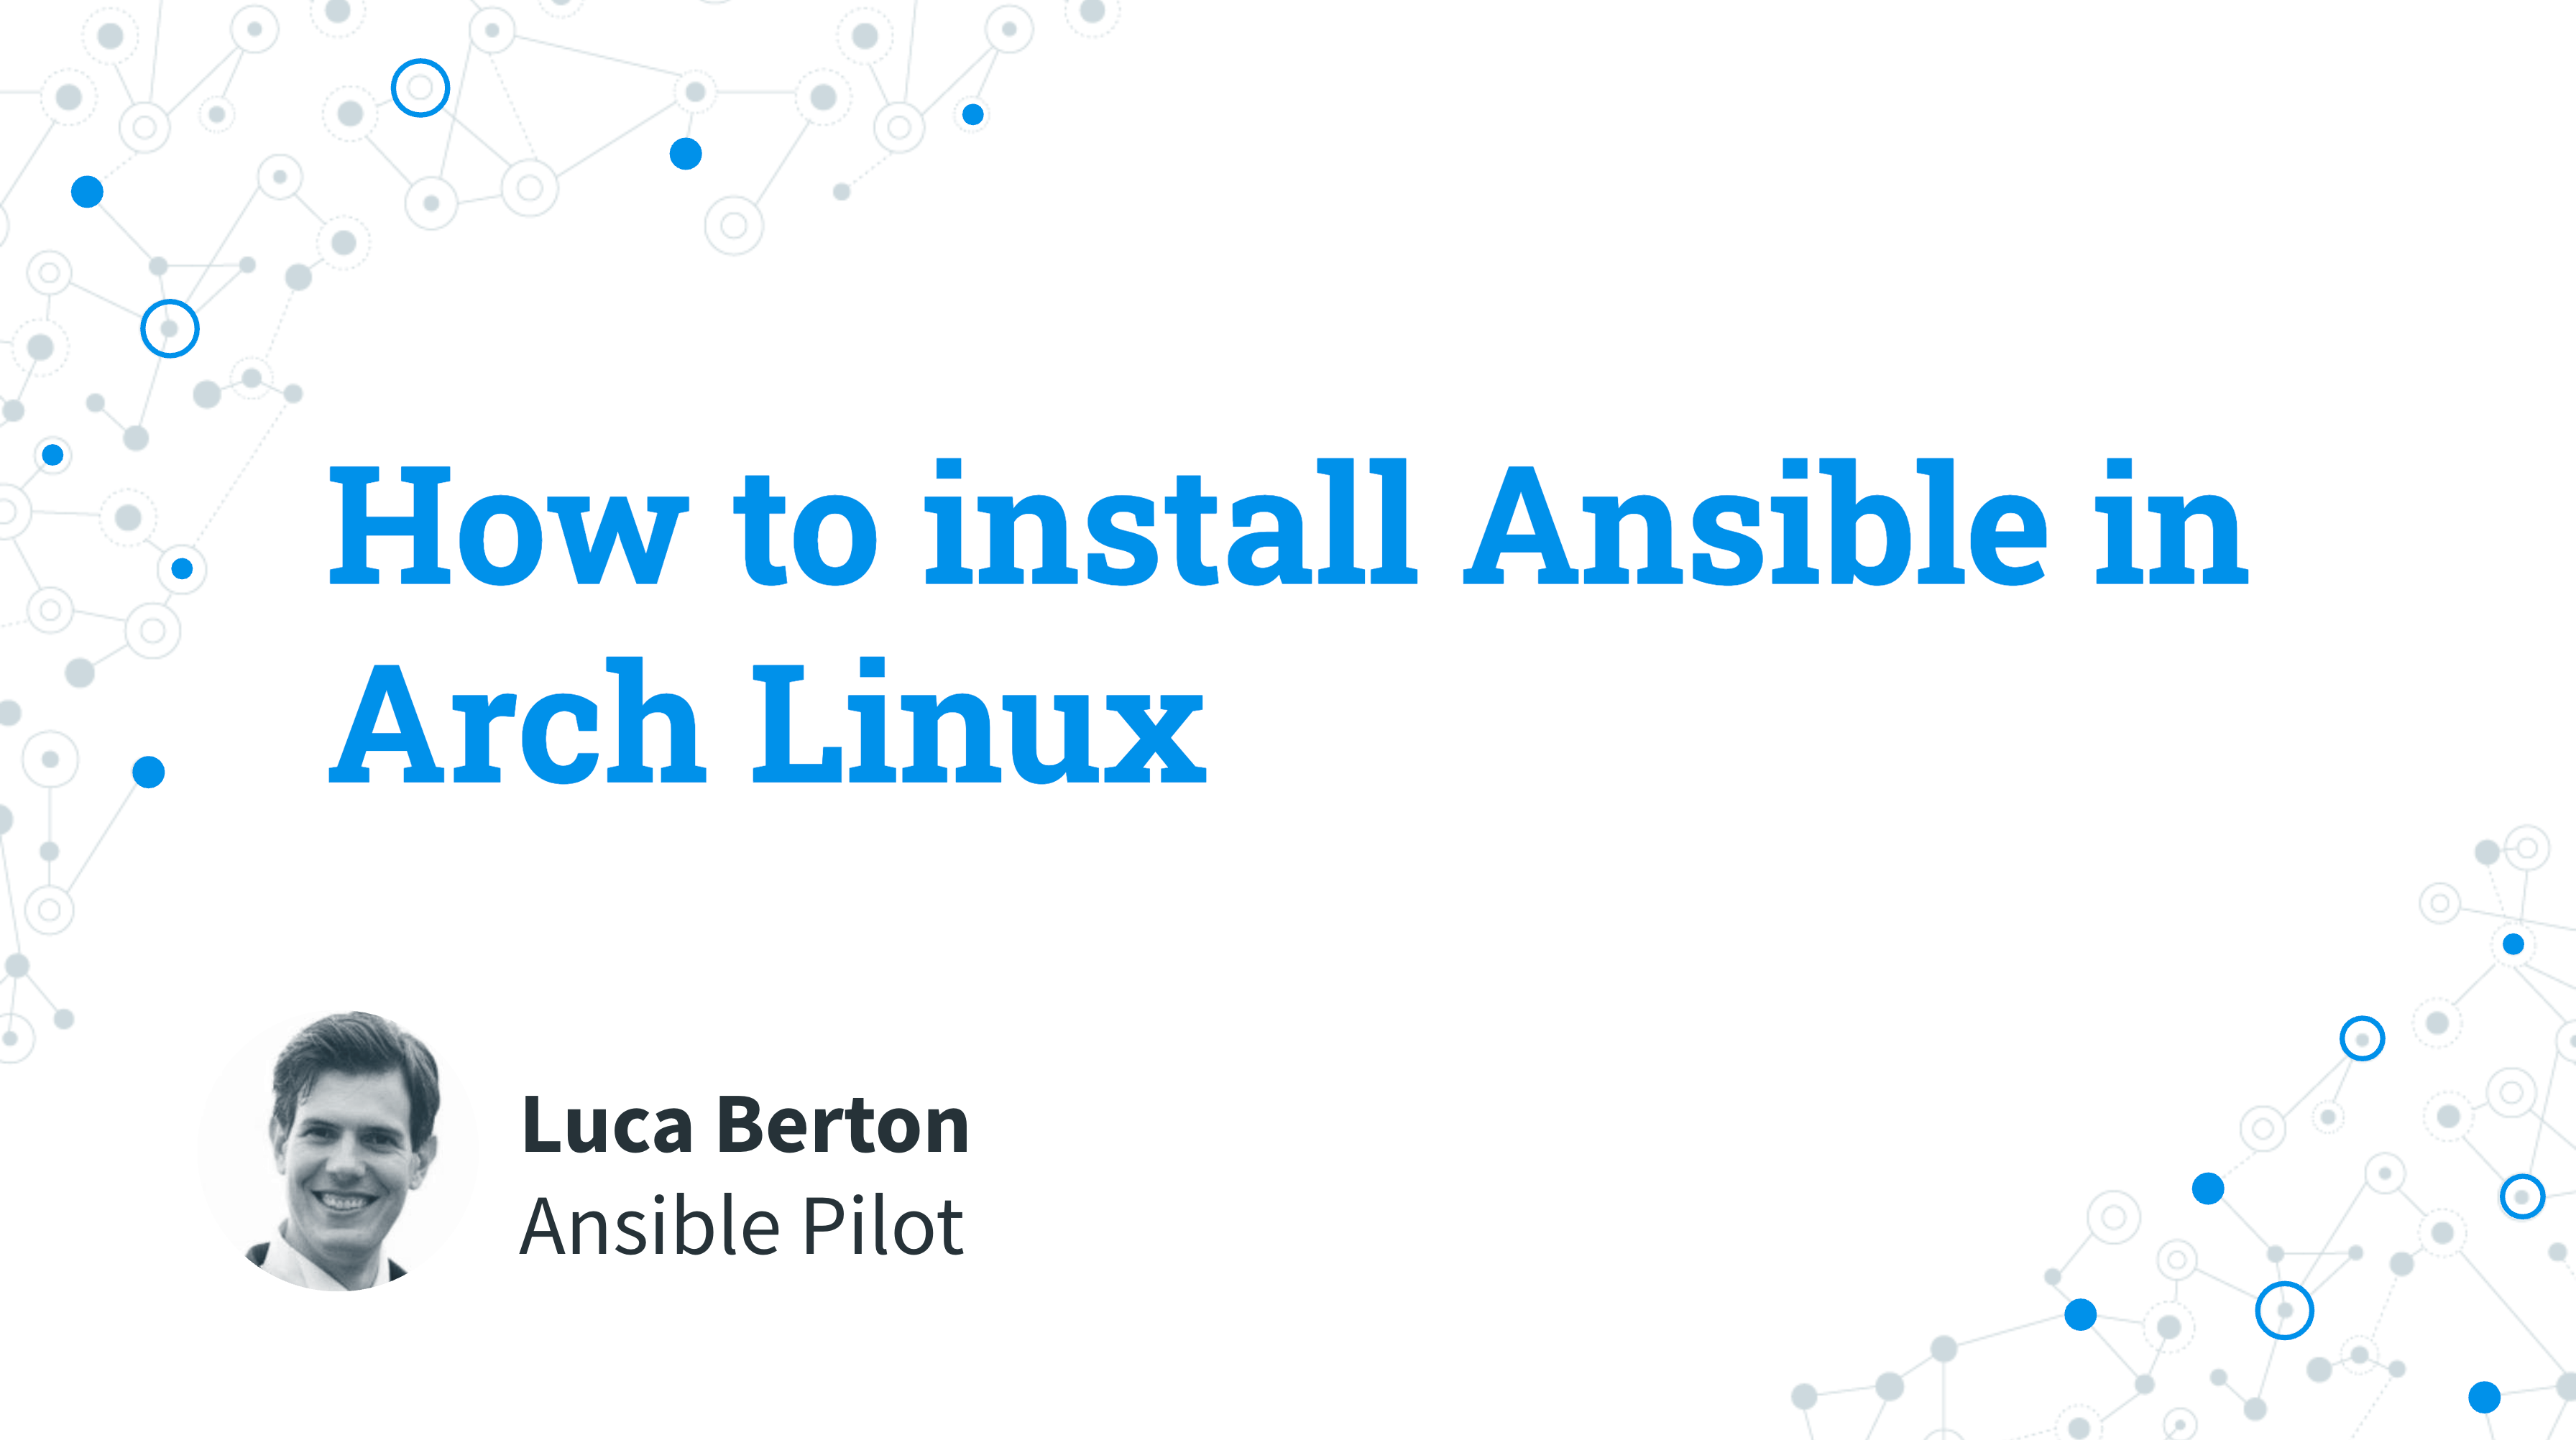 How to install Ansible in Arch Linux 2021.12.01 - Ansible install